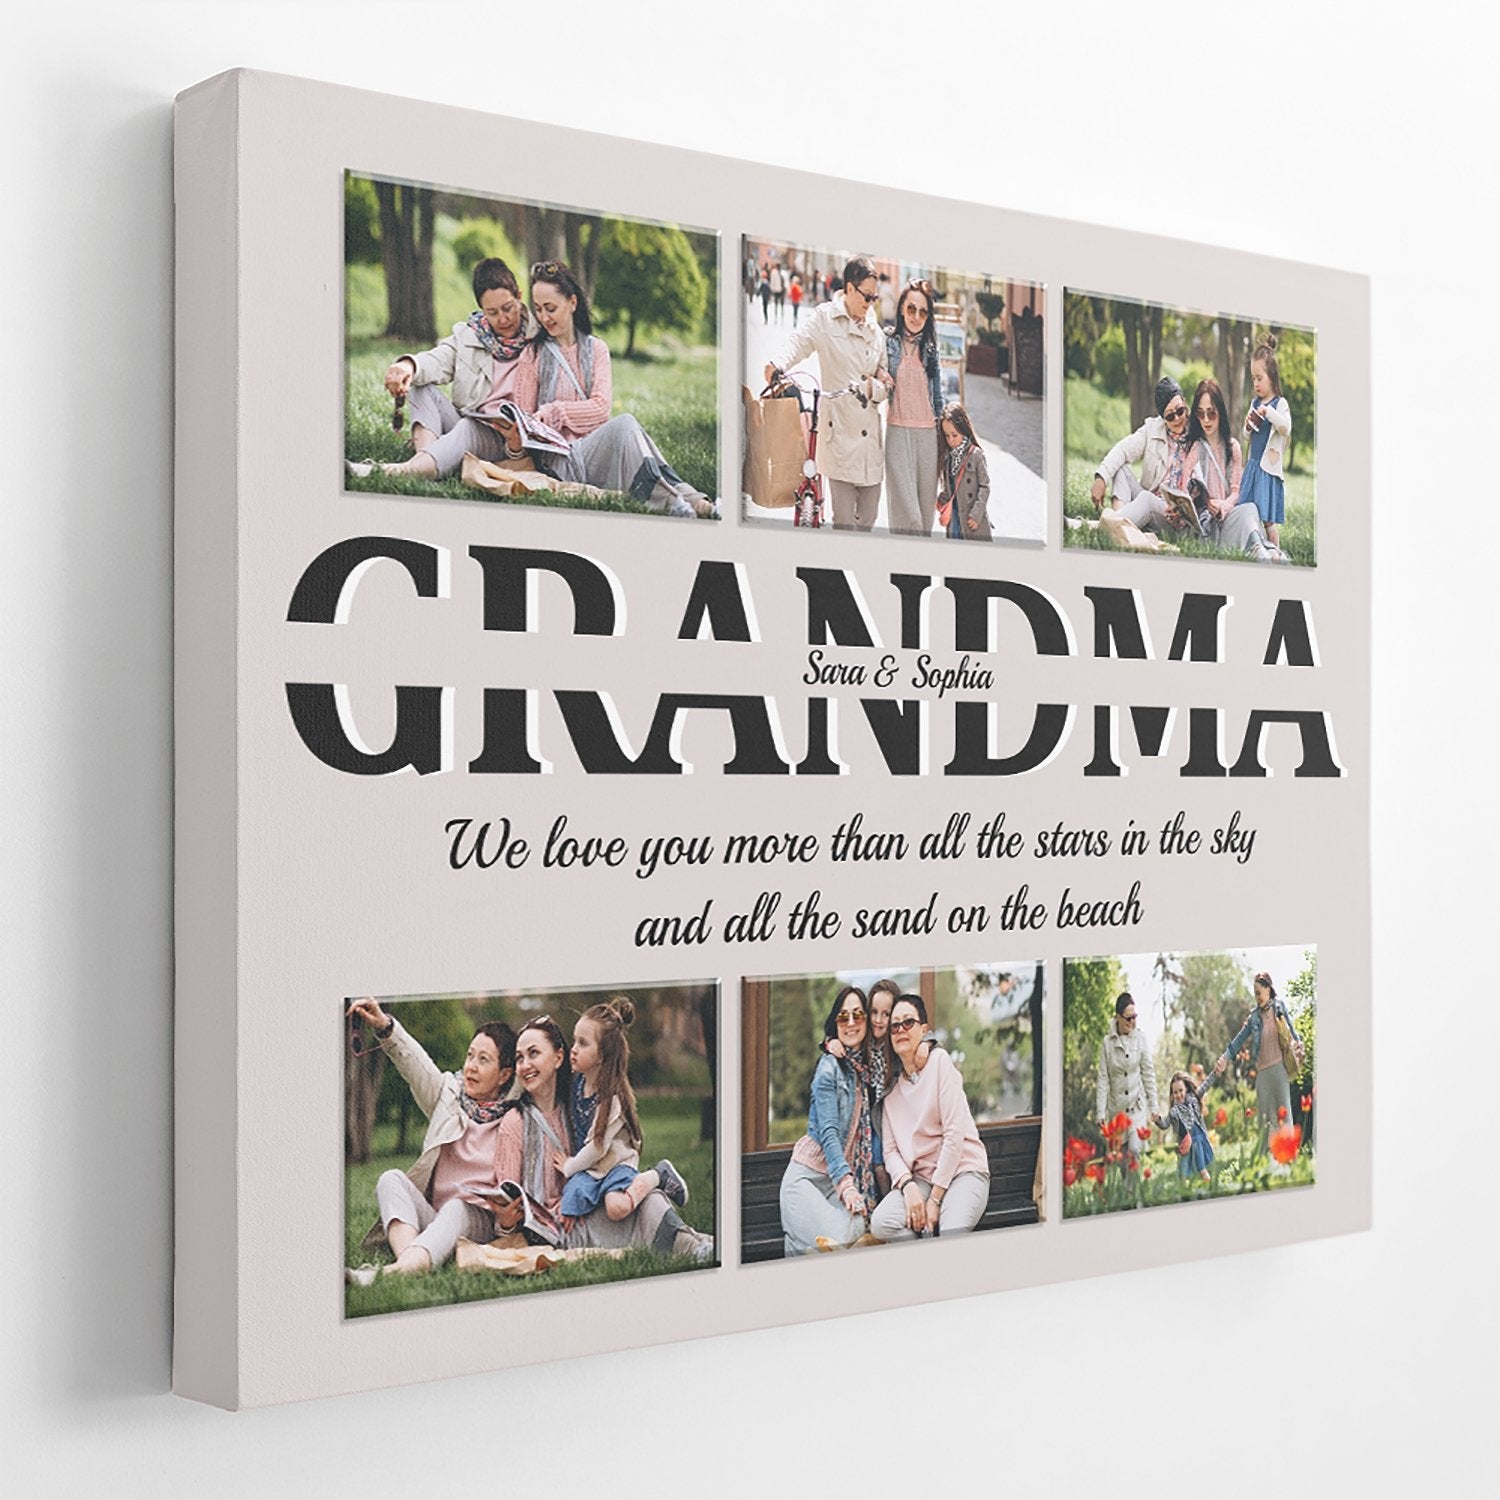 https://cdn.shopify.com/s/files/1/0285/9358/6228/products/grandma-custom-text-and-photo-personalized-light-grey-background-canvas-927768_3000x3000.jpg?v=1623199793